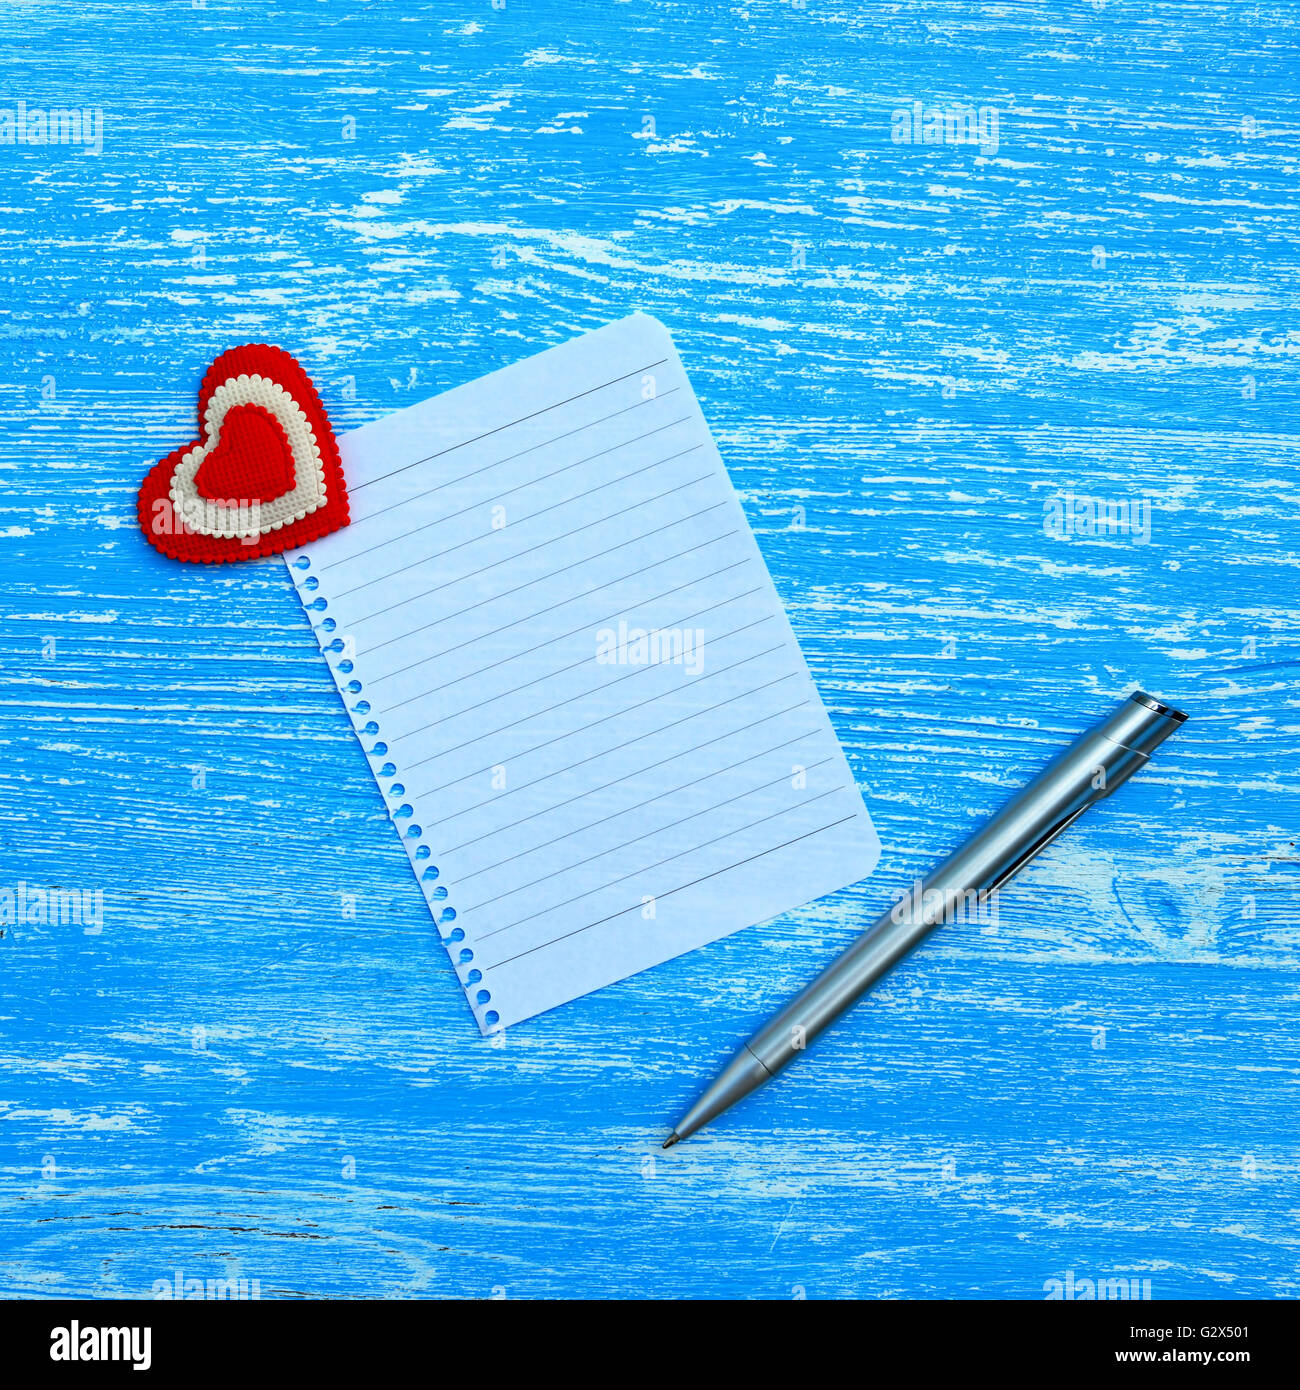 Blank sheet of paper and hearts on a blue wooden background Stock Photo